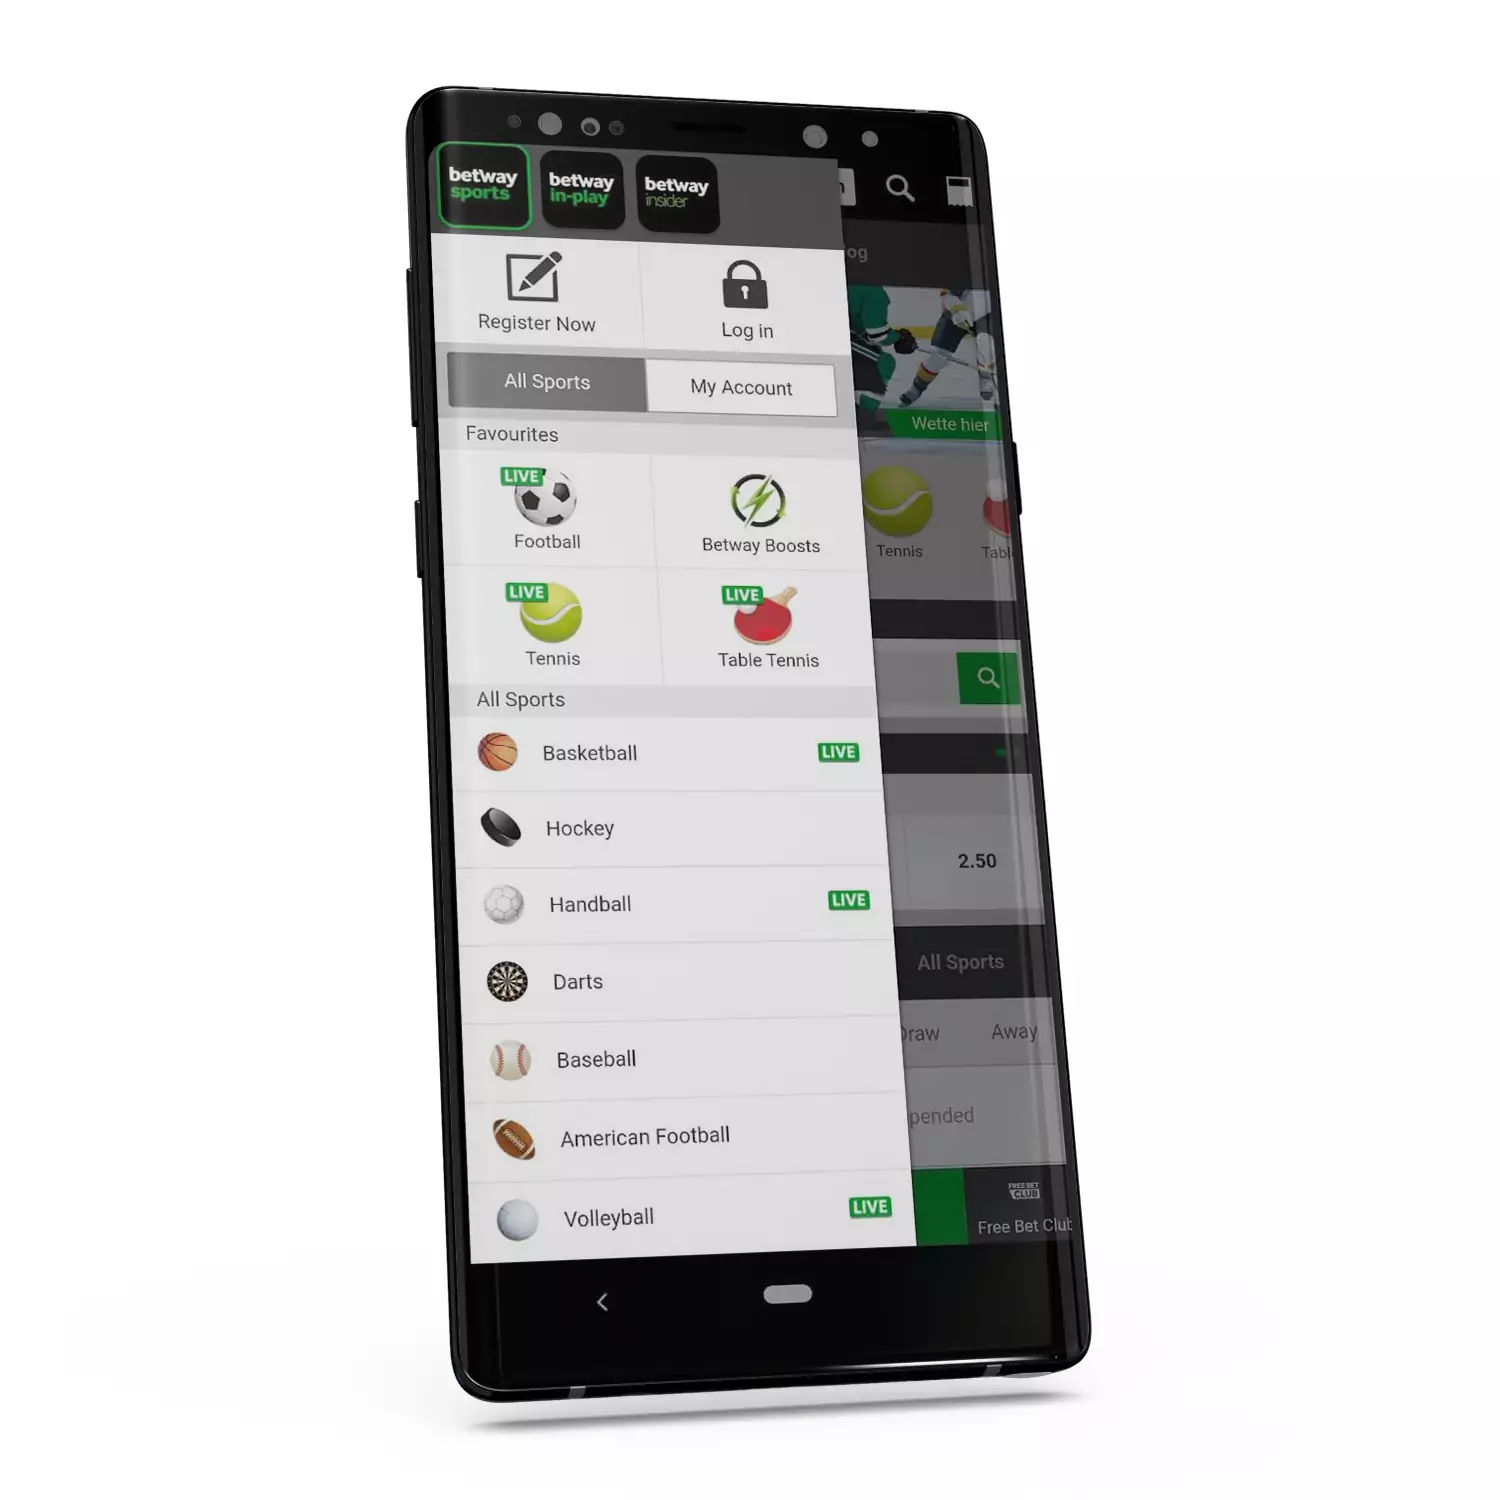 The Betway app is available on Android and iOS smartphones.